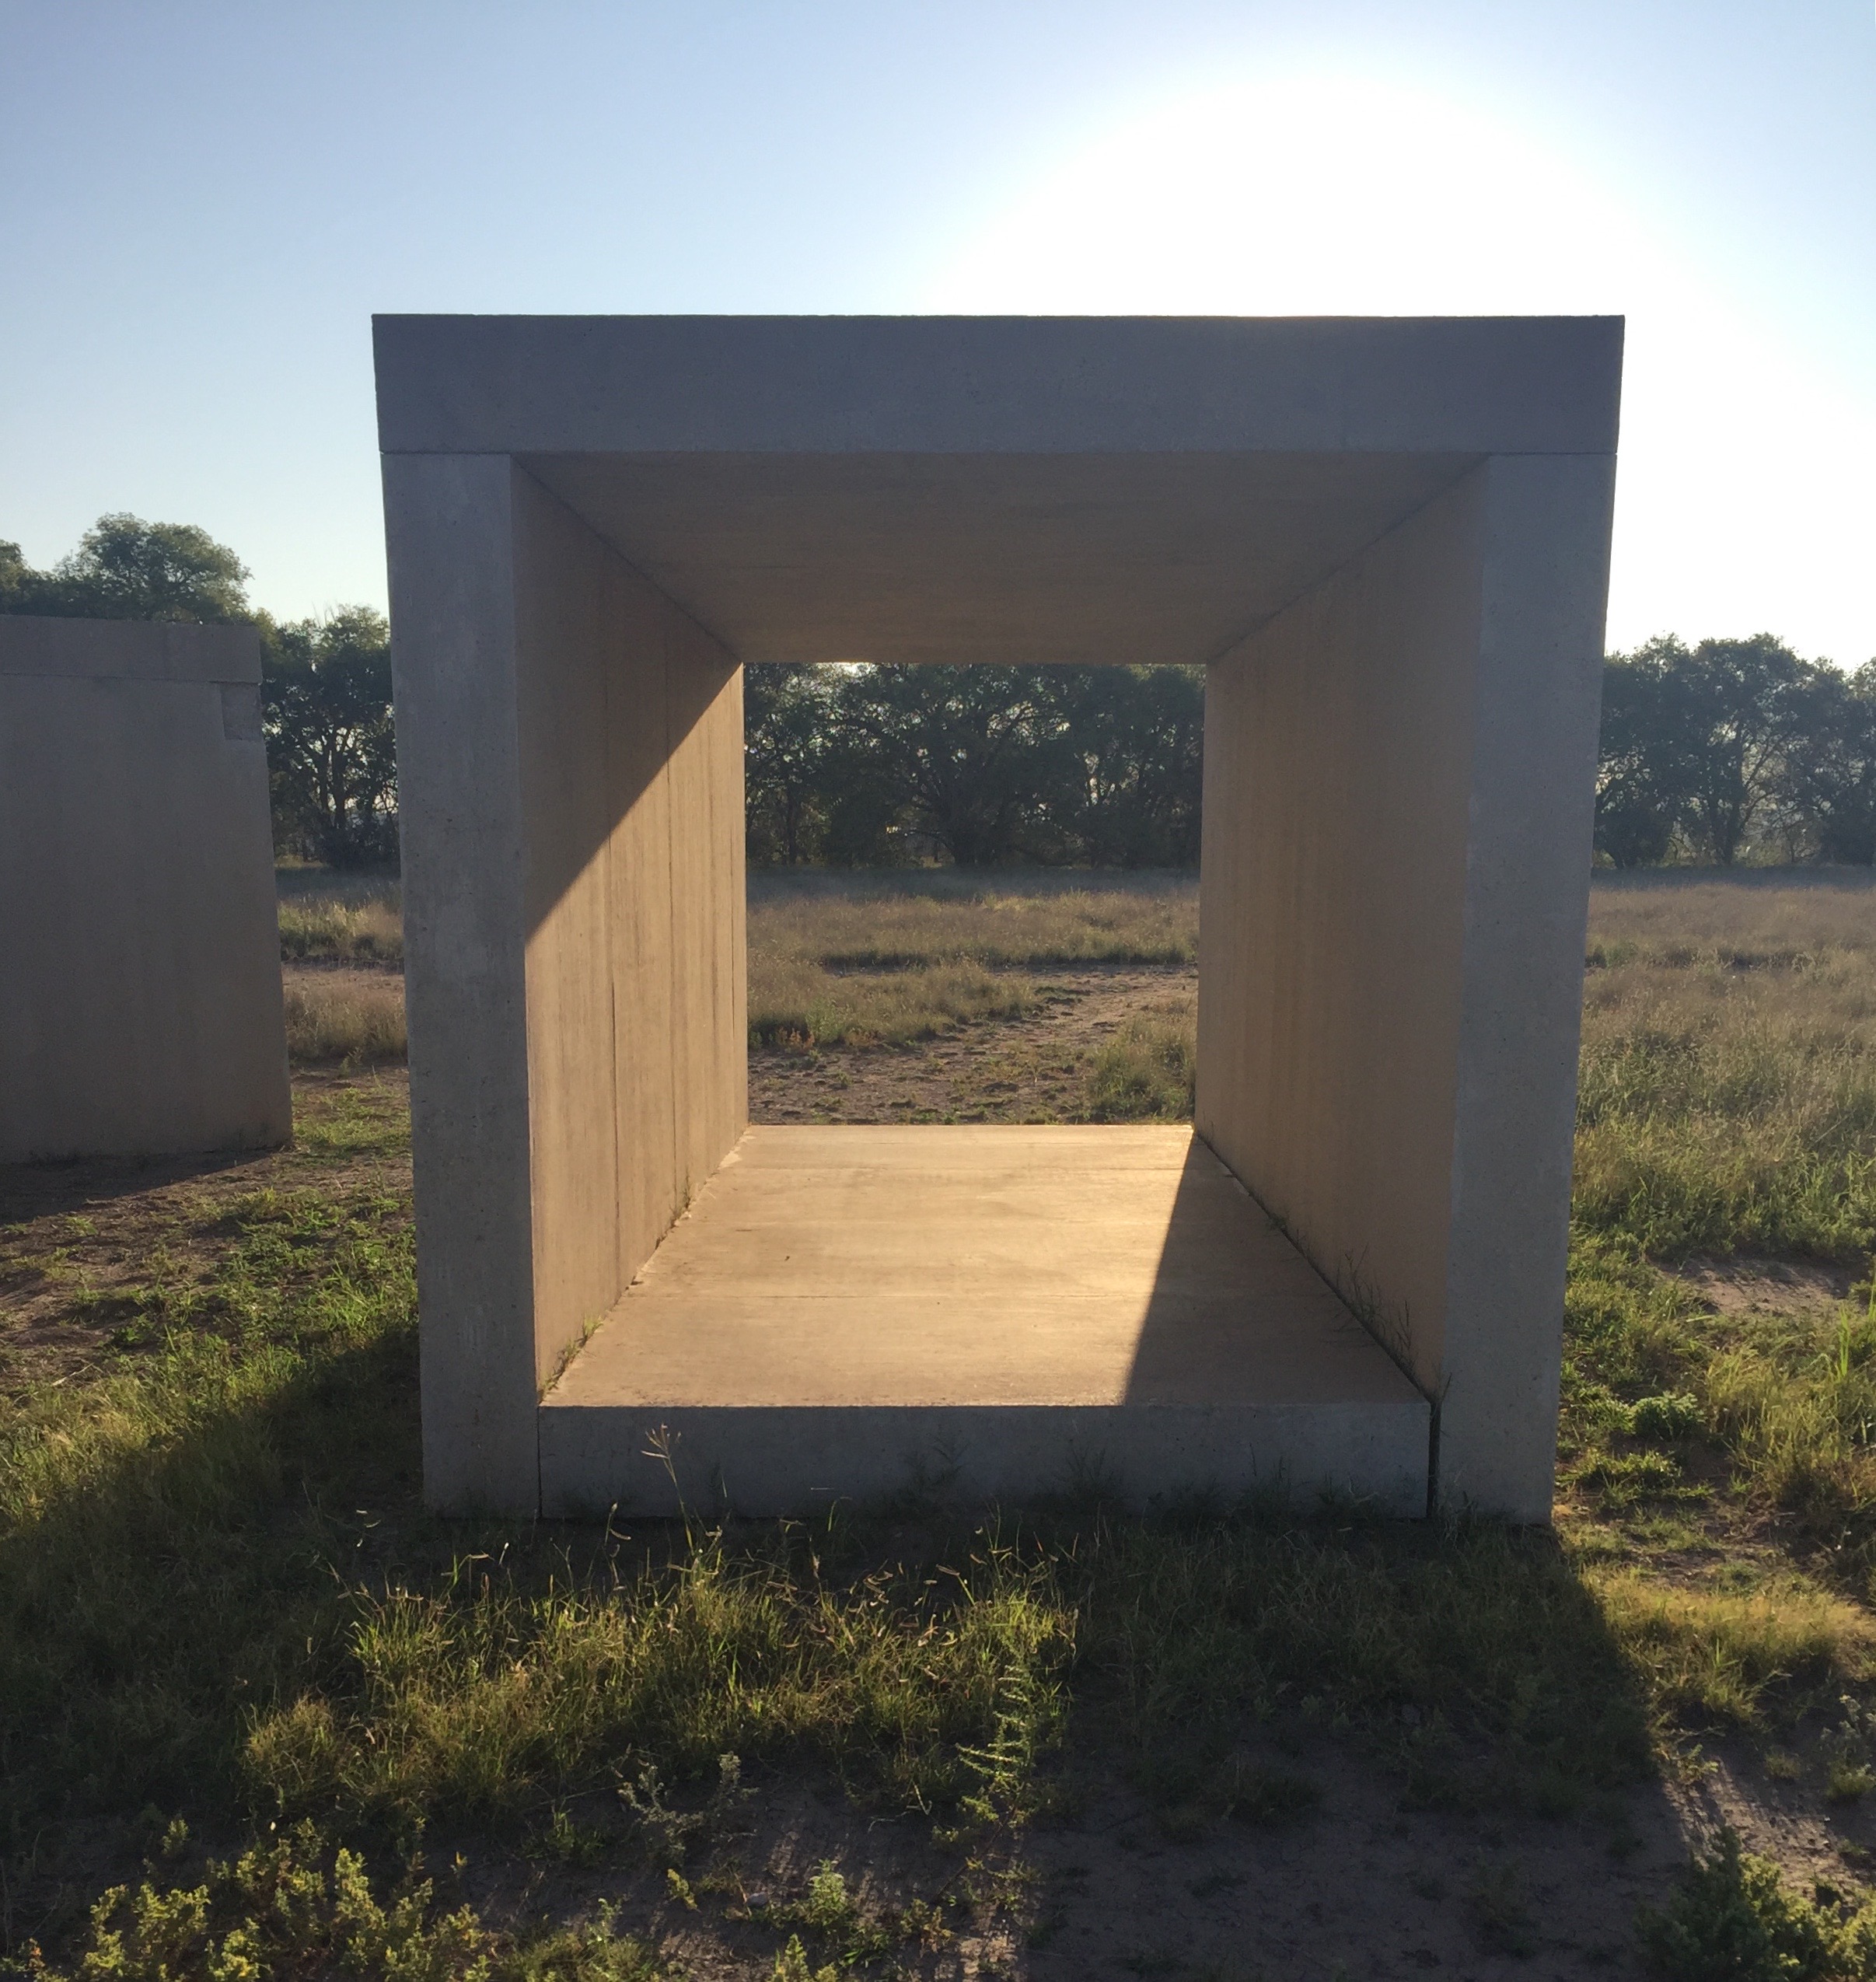 A concrete structure in the form of an open square in a grassy outdoor setting